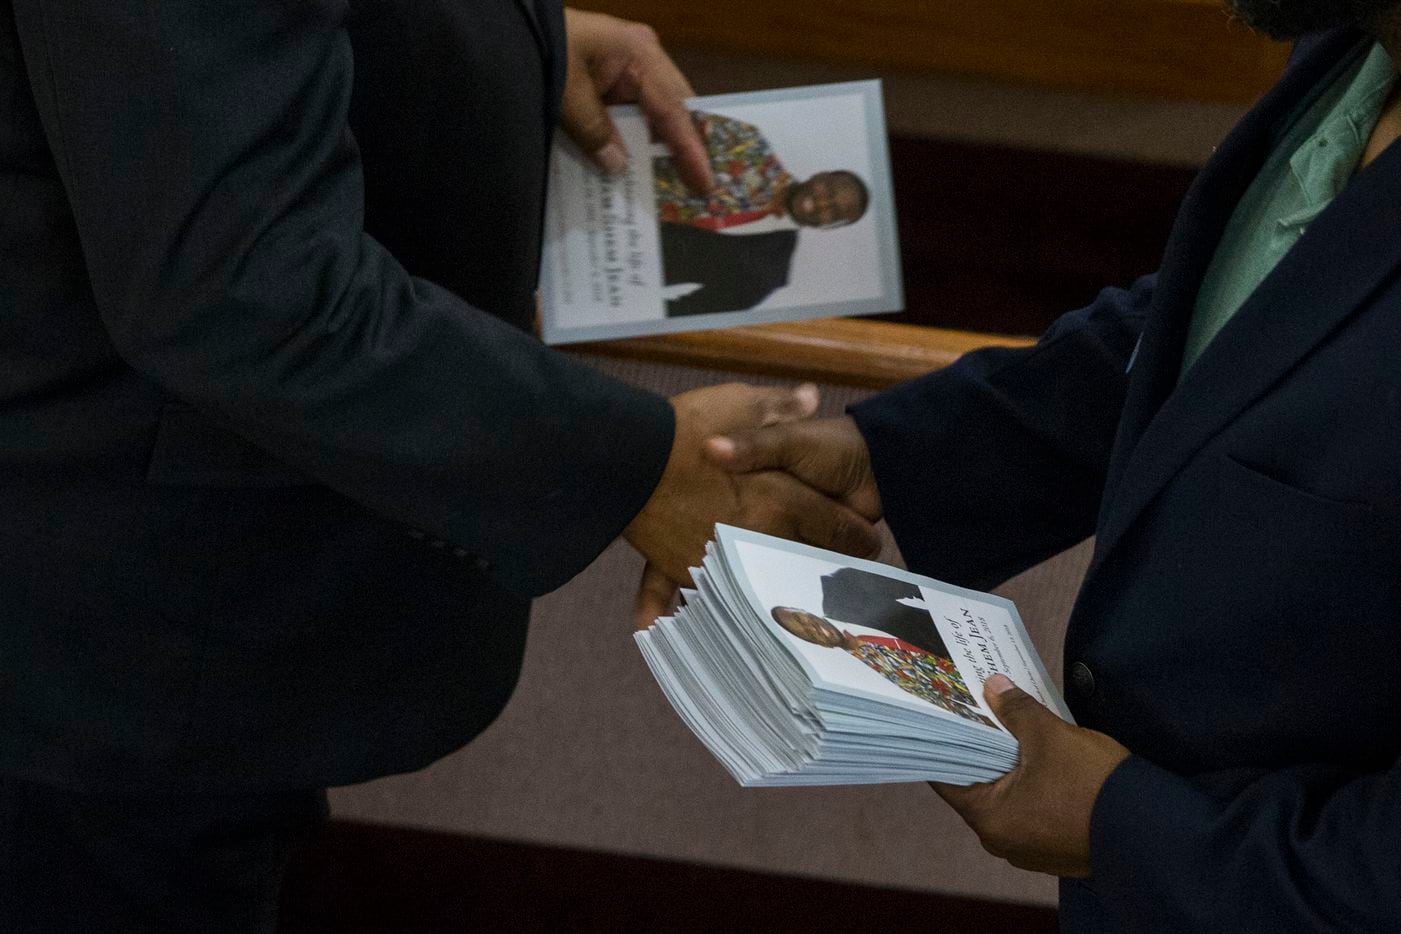 An usher shakes a mouners' hand after handing him a program before the funeral service for Botham Shem Jean at the Greenville Avenue Church of Christ on Thursday, September 13, 2018 in Richardson, Texas. He was shot and killed by a Dallas police officer in his apartment last week in Dallas. (Shaban Athuman/ The Dallas Morning News)